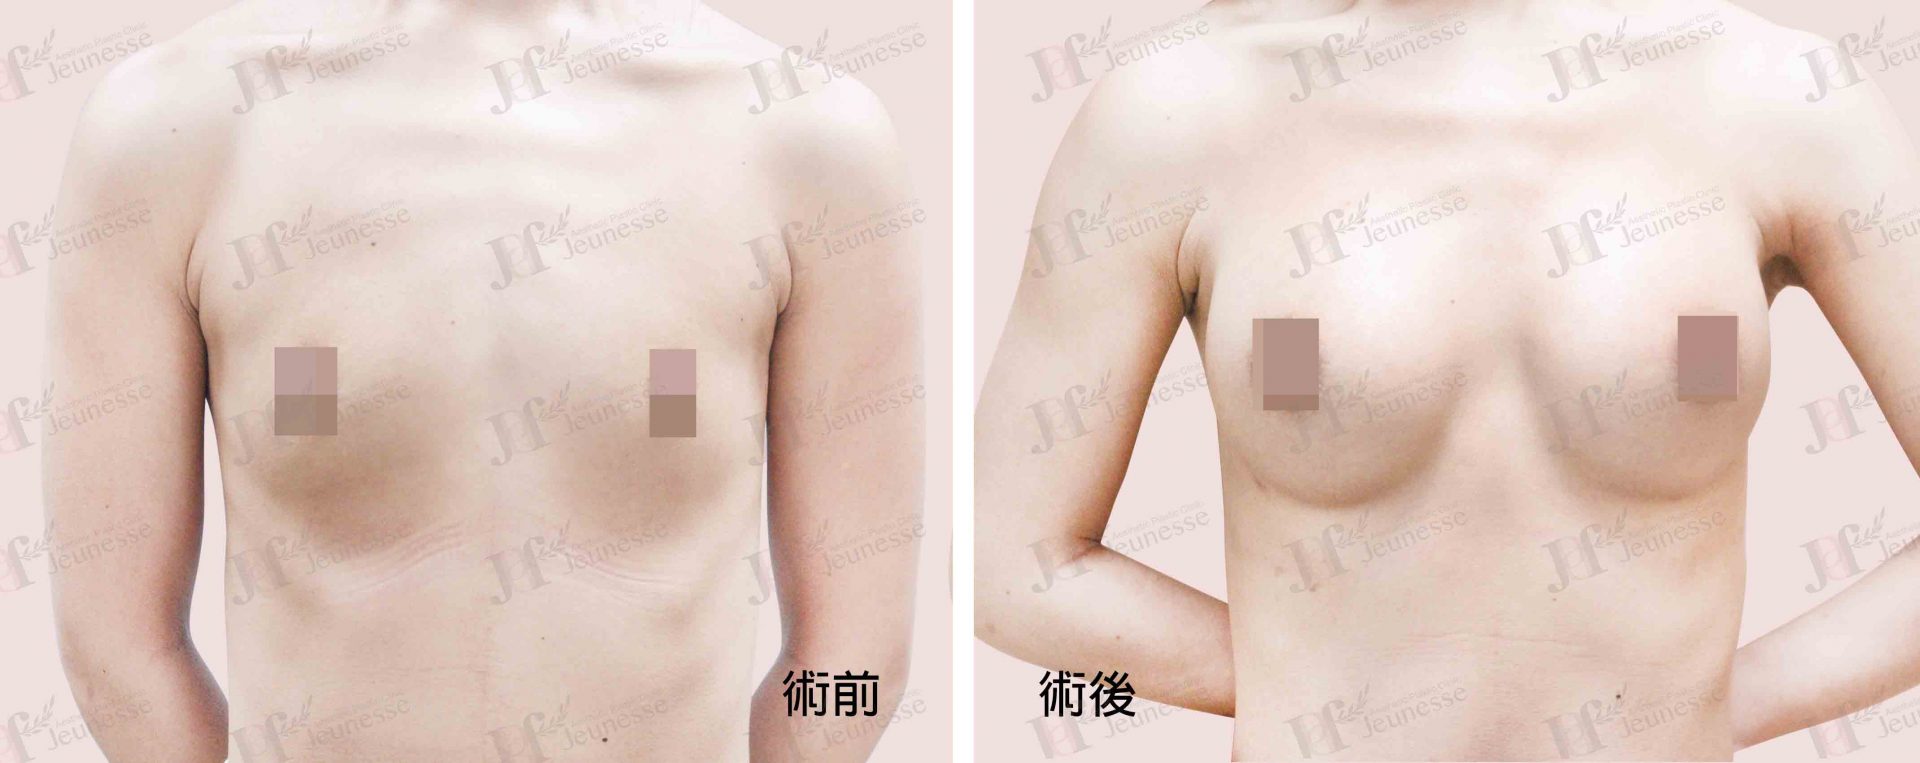 Breast Augmentation- Silicone implants -case3 正面-浮水印